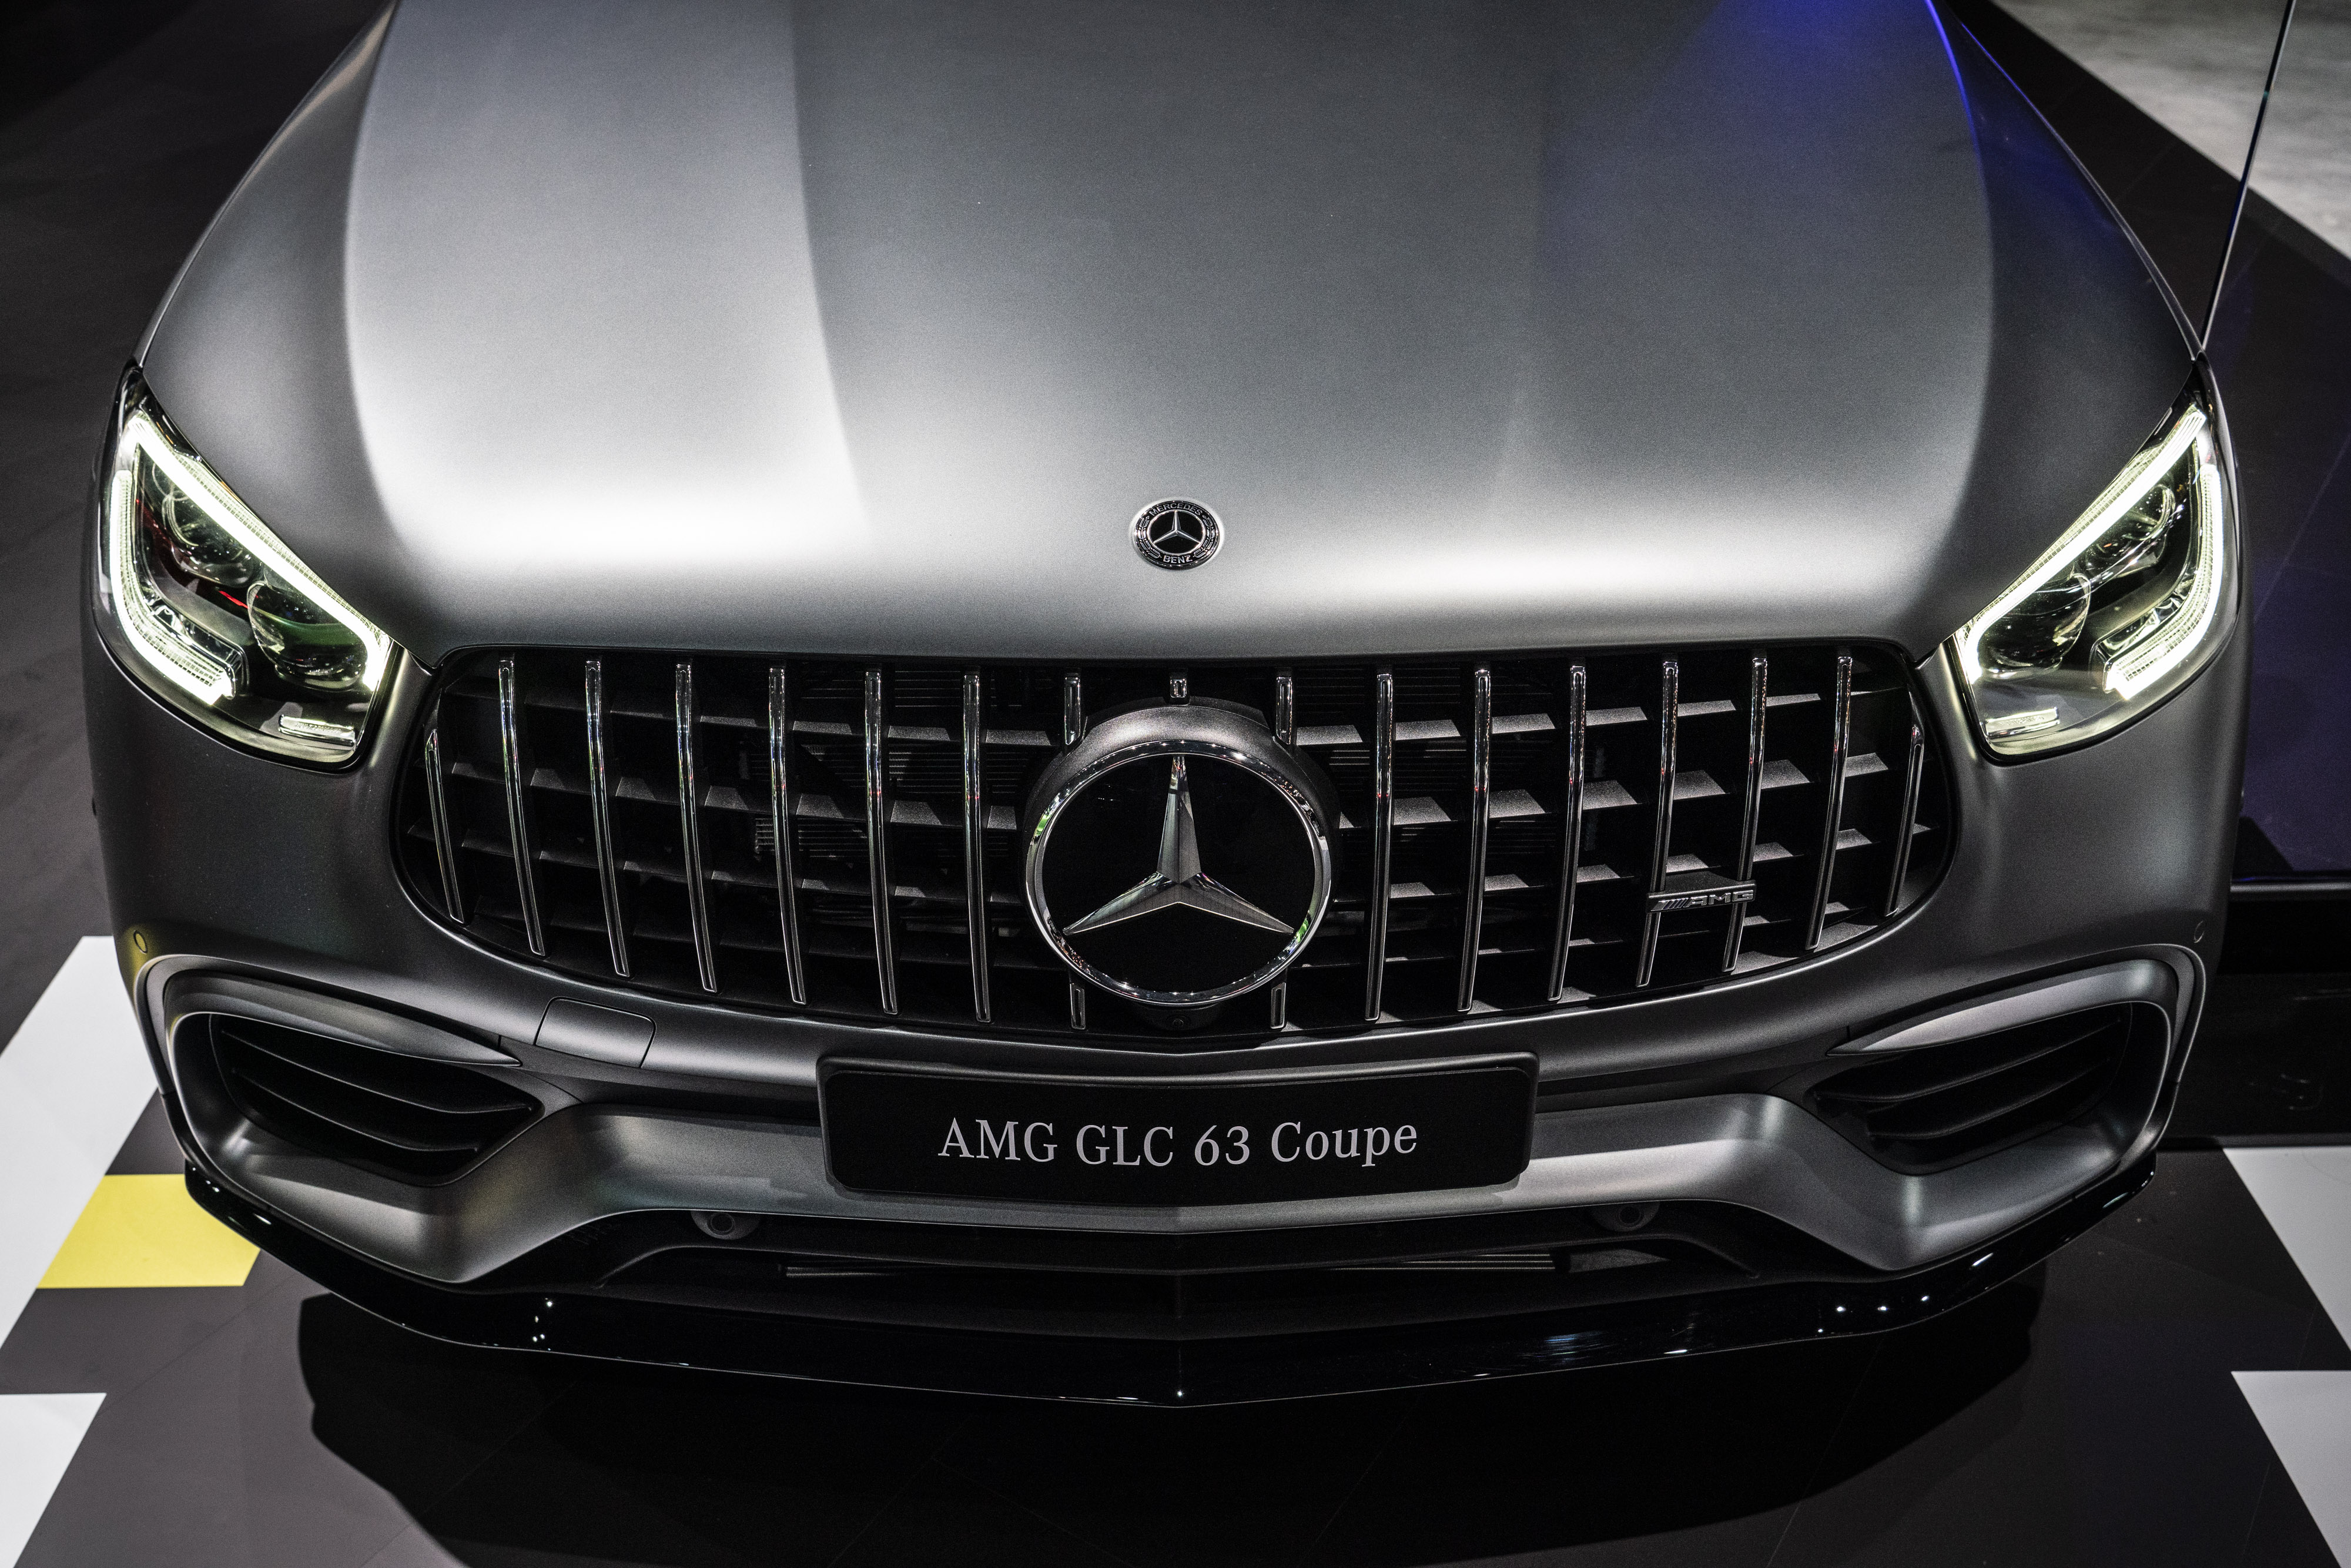 A Daimler AG Mercedes-Benz GLC Coupe sports utility vehicle (SUV) is displayed during the 2019 New York International Auto Show (NYIAS) in New York, U.S., on Thursday, April 18, 2019. The NYIAS, North America's first and largest-attended auto show dating back to 1900, showcases an incredible collection of cutting-edge design and extraordinary innovation. Photographer: Natan Dvir/Bloomberg